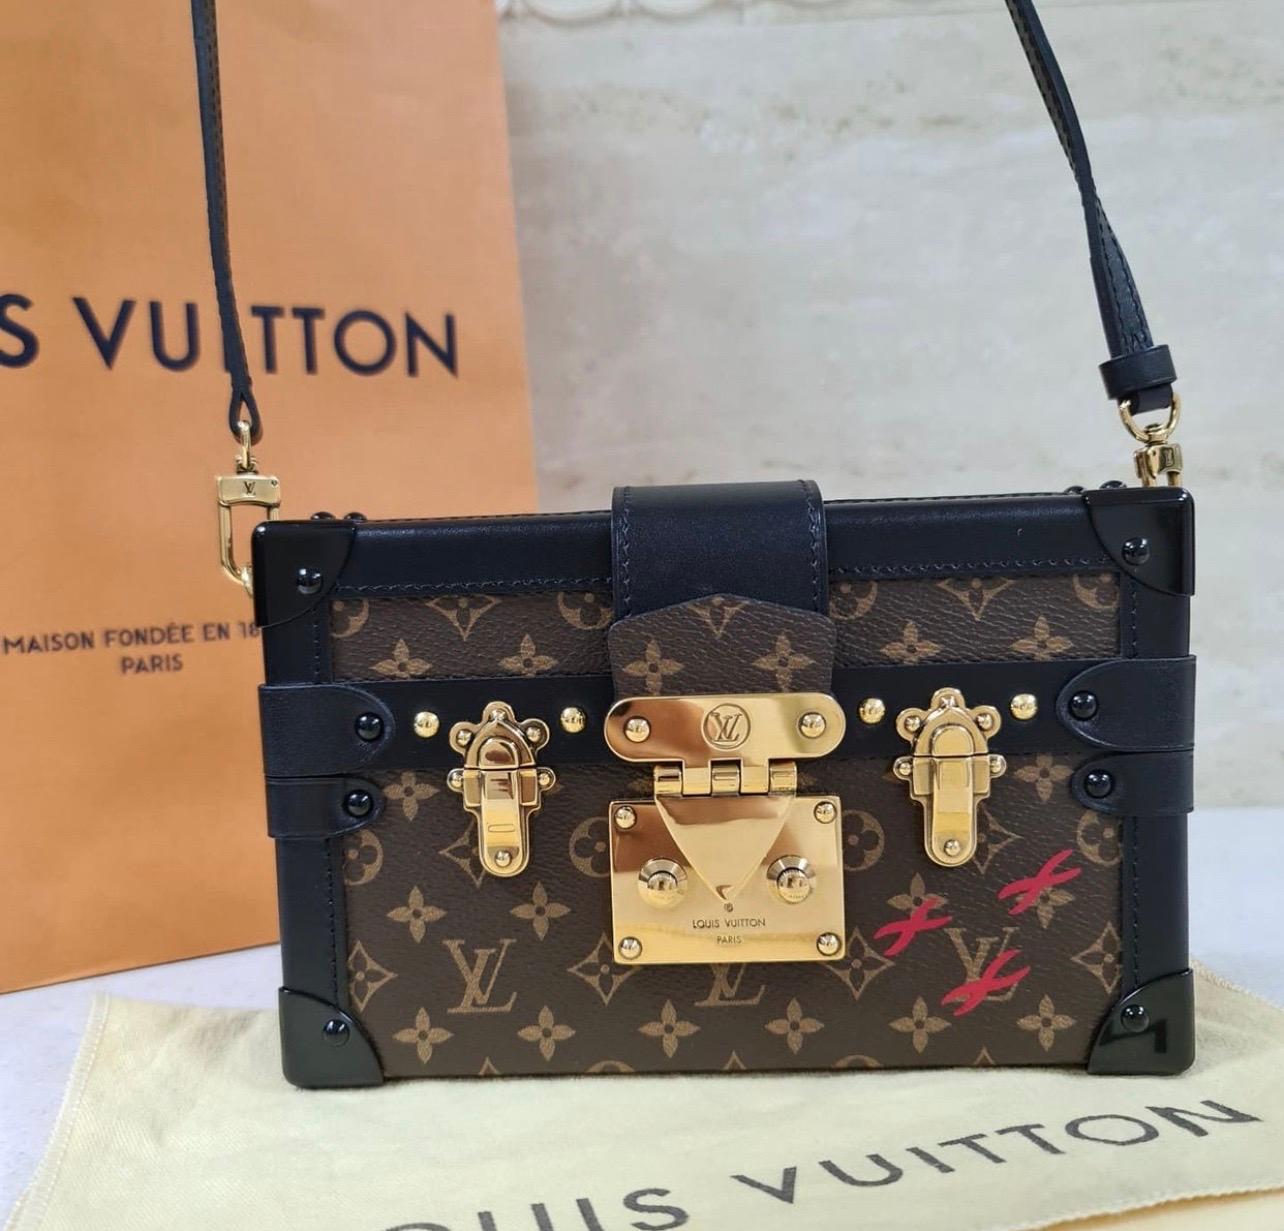 Inspired by their rich history of trunk making, the Louis Vuitton Petite Malle beautifully mixes the skilled craftsmanship of trunk construction with the effortless style of a modern day fashionista's crossbody bag. This adorable Petite Malle (